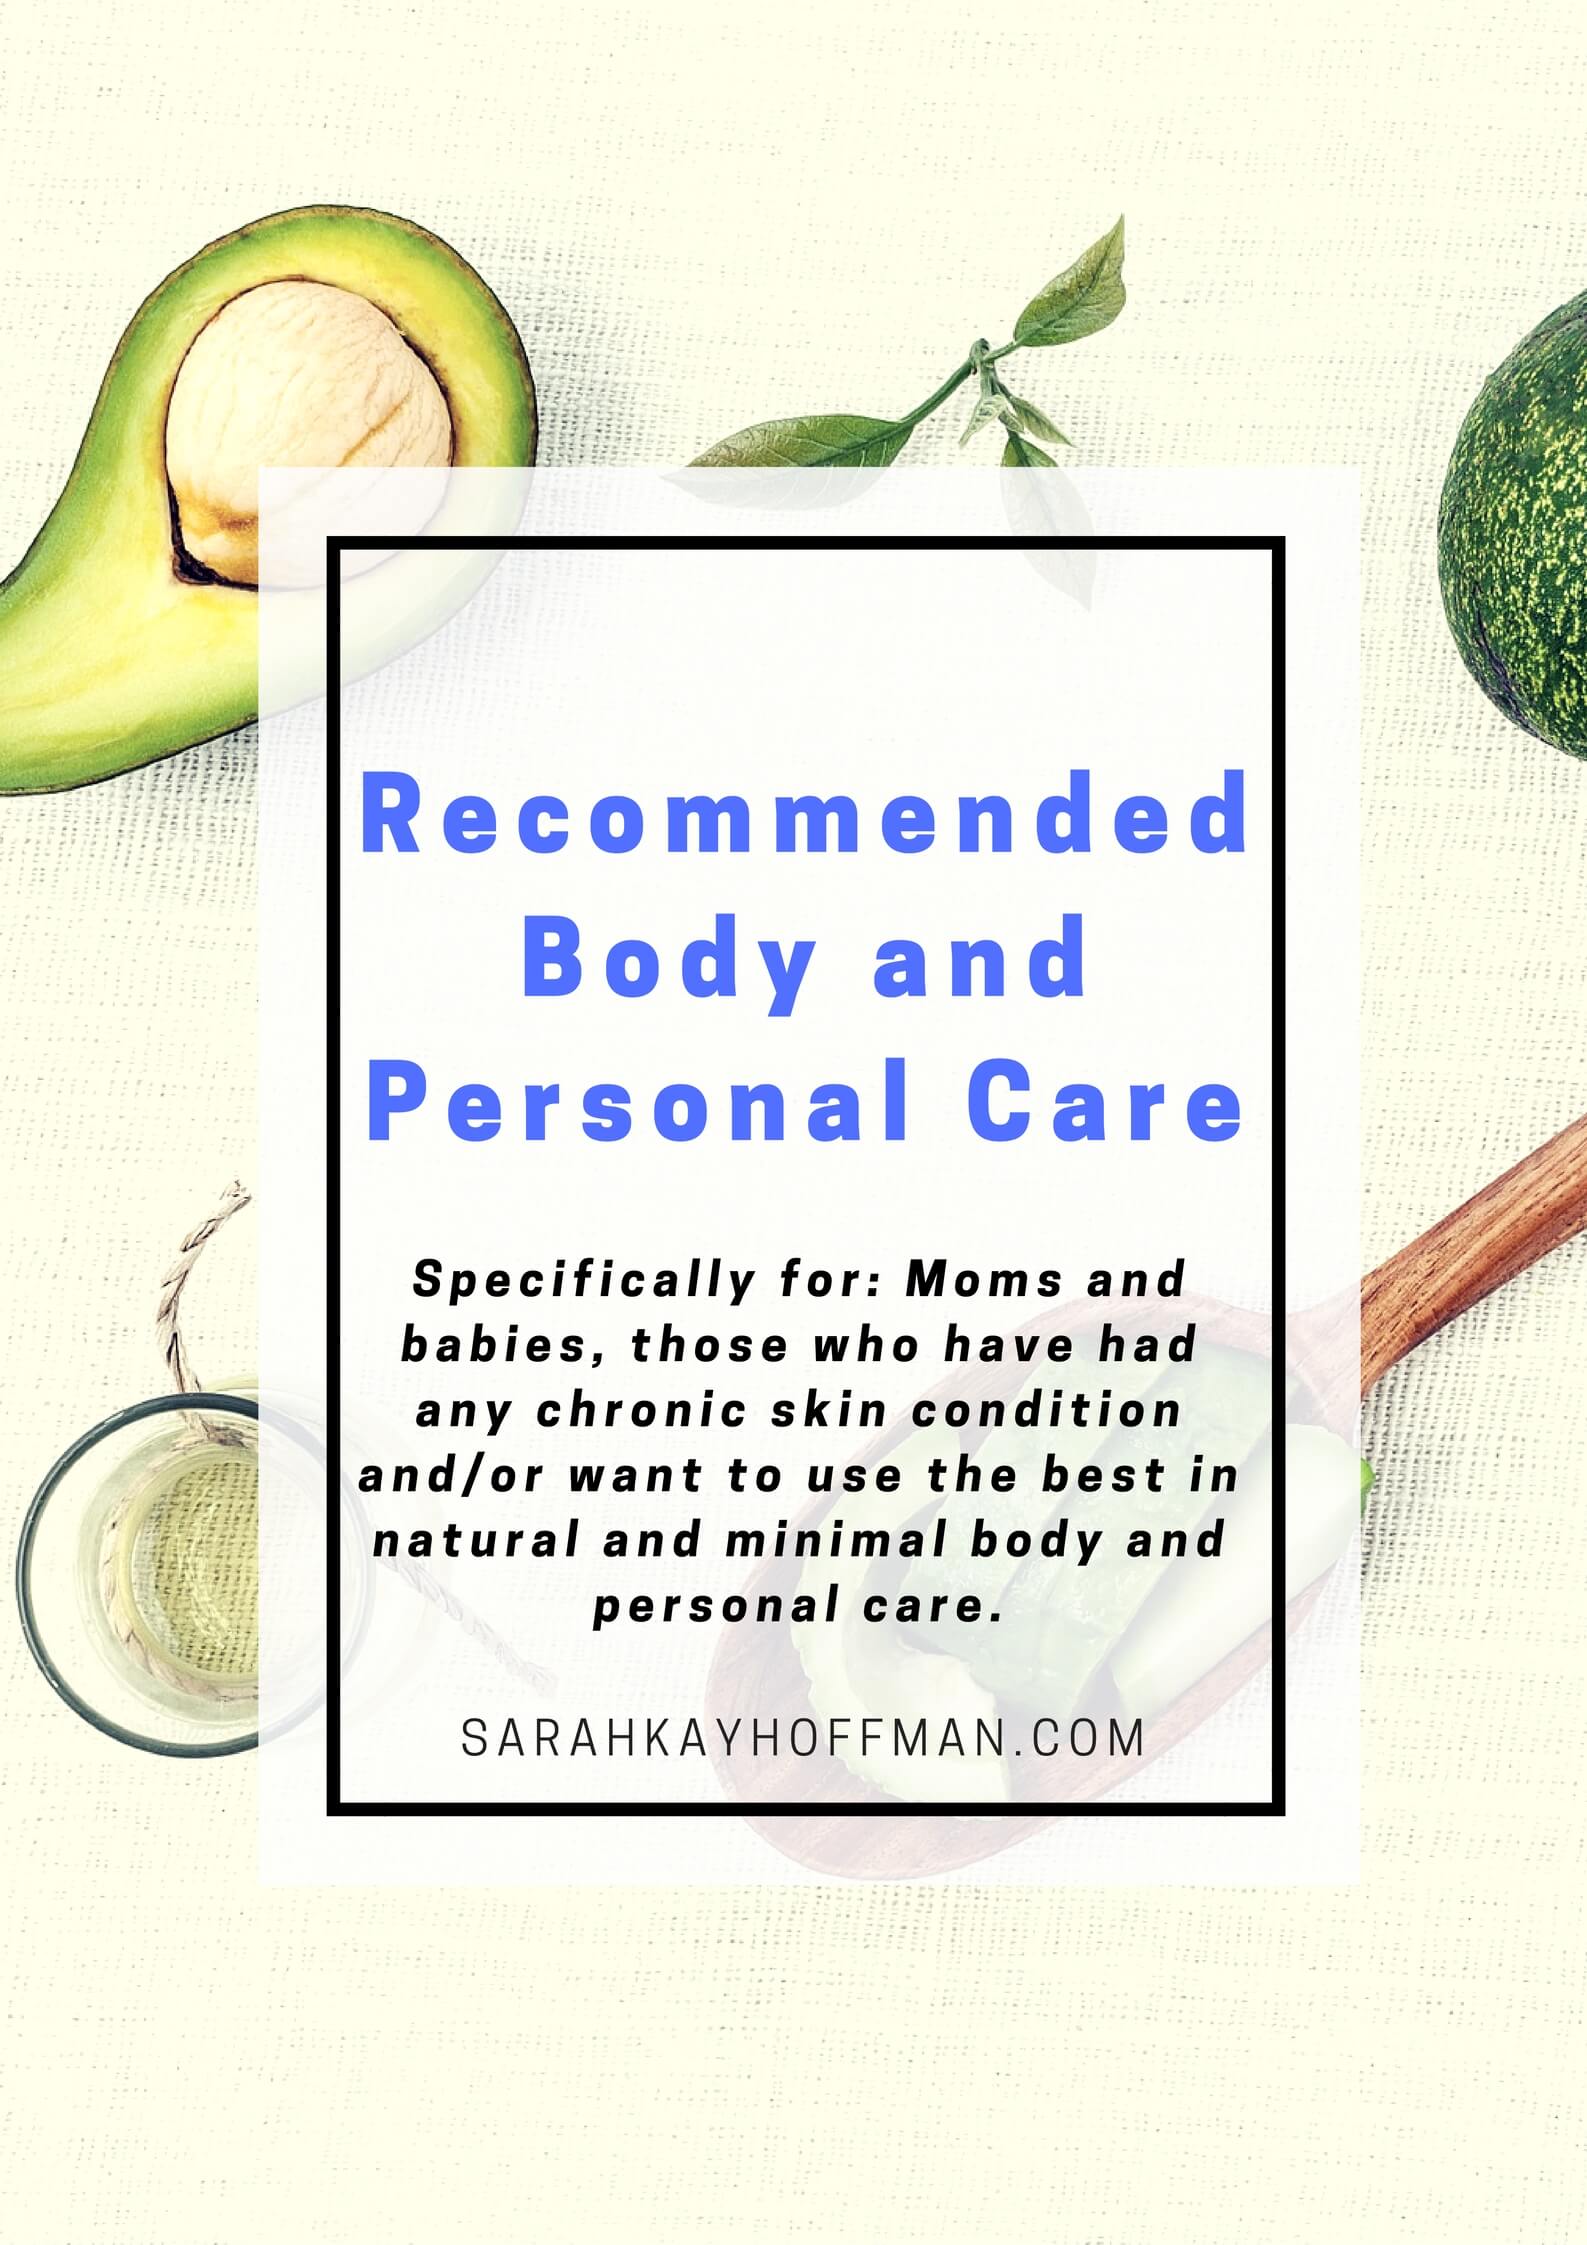 Recommended Body and Personal Care via sarahkayhoffman.com